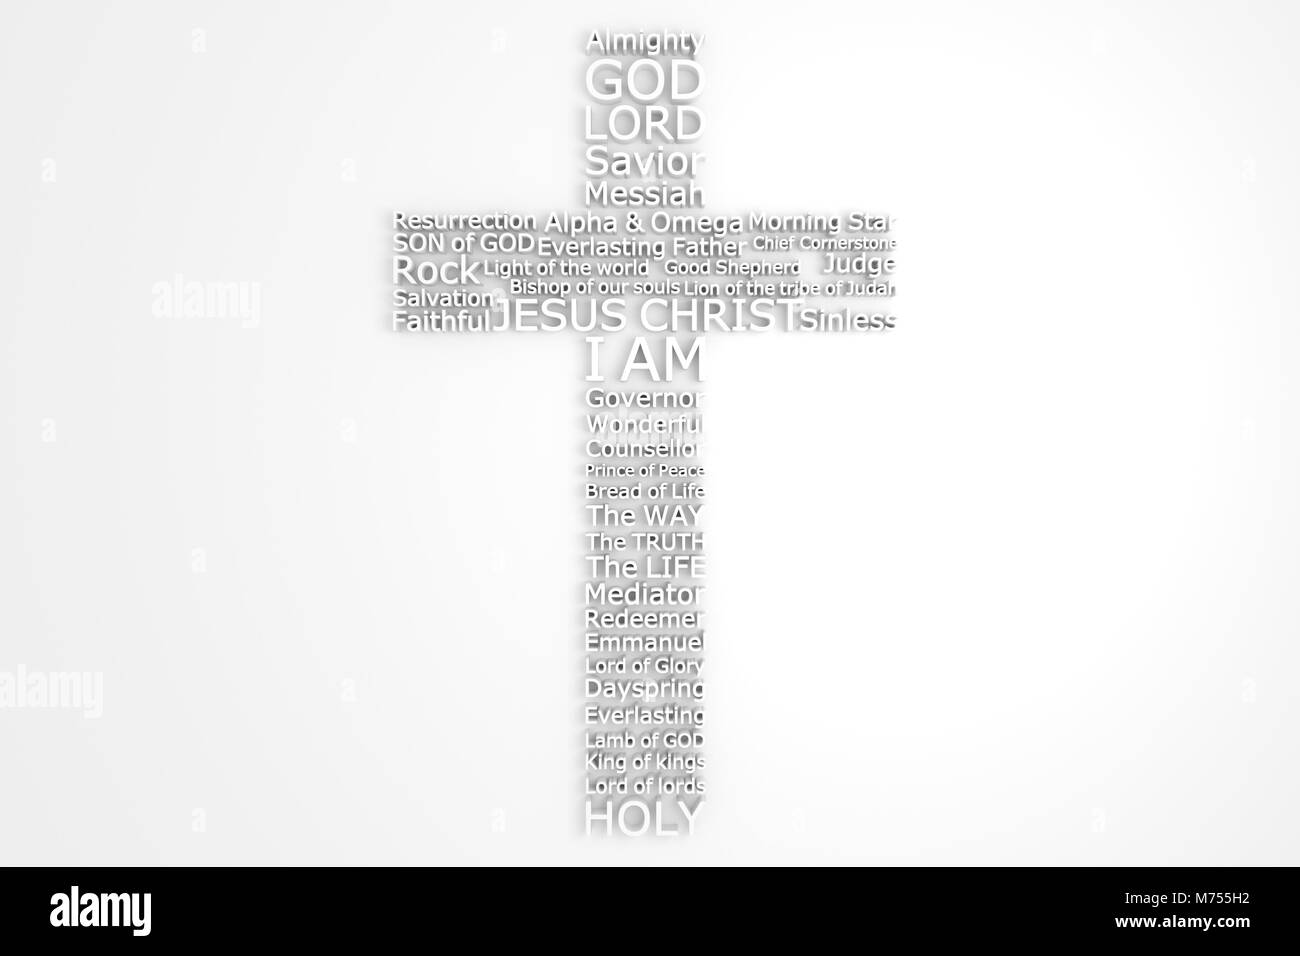 3D Cross Made Composed of The Many Biblical Names of JESUS CHRIST - Top View Stock Photo